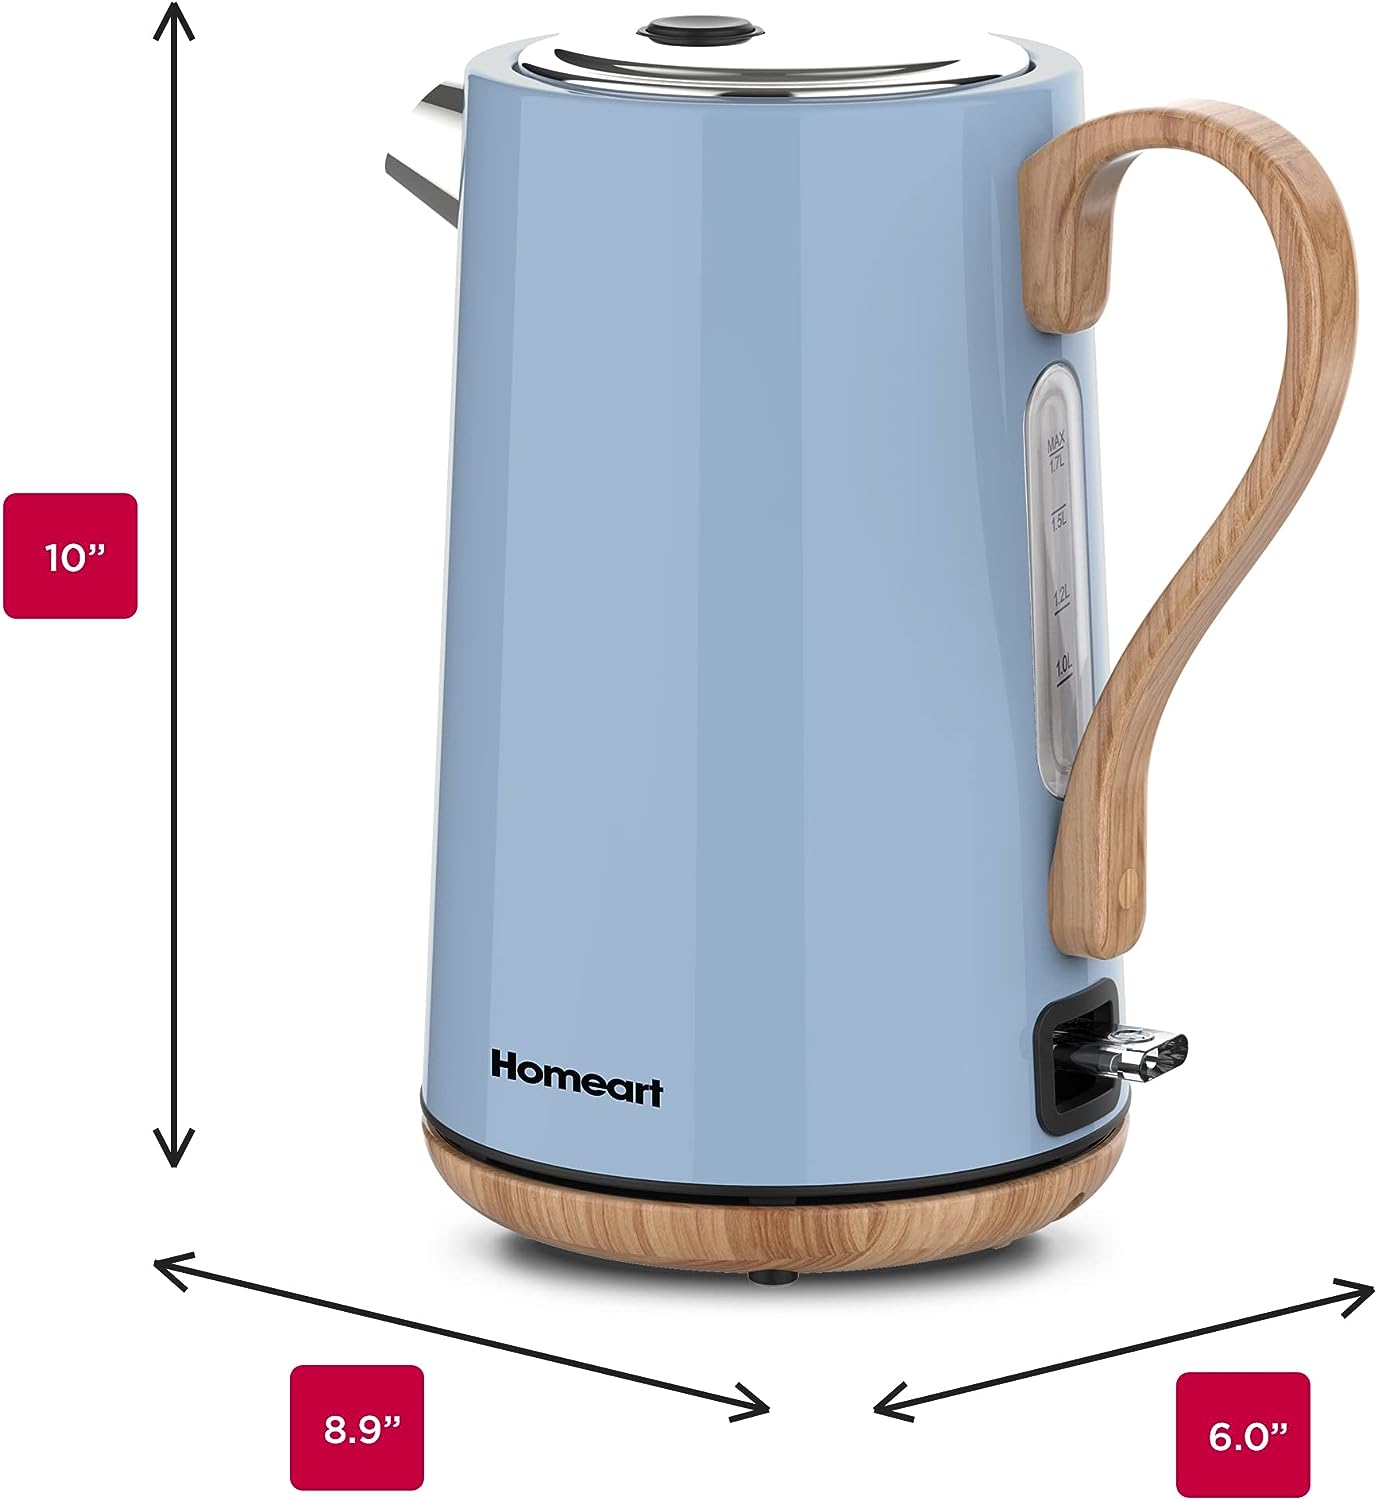 Homeart Panda Cordless Electric Kettle with Wood Detail - Stainless Steel With Removable Filter, Fast Boiling and Auto Shut-off - 1.7L Capacity, Powder Blue